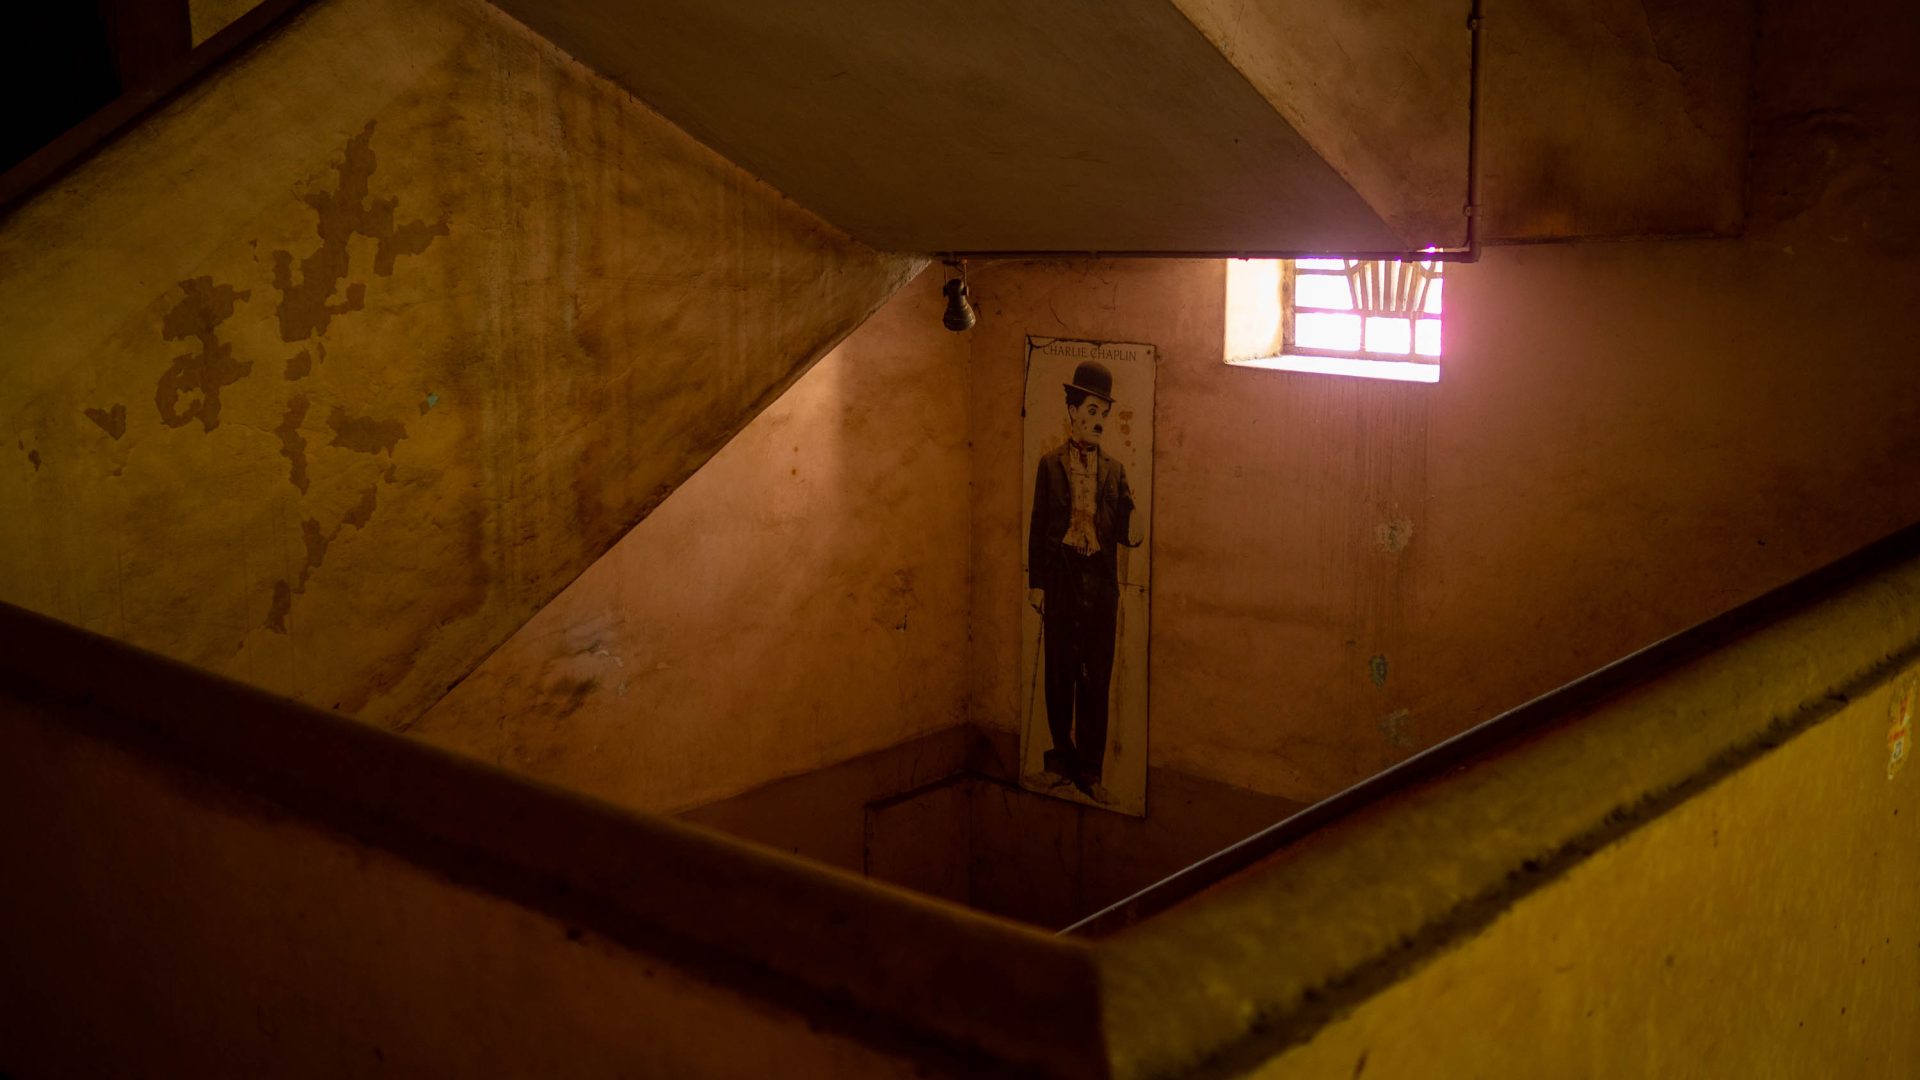 An old image of Charlie Chaplin on a wall of old yellowing paint in a stairwell.